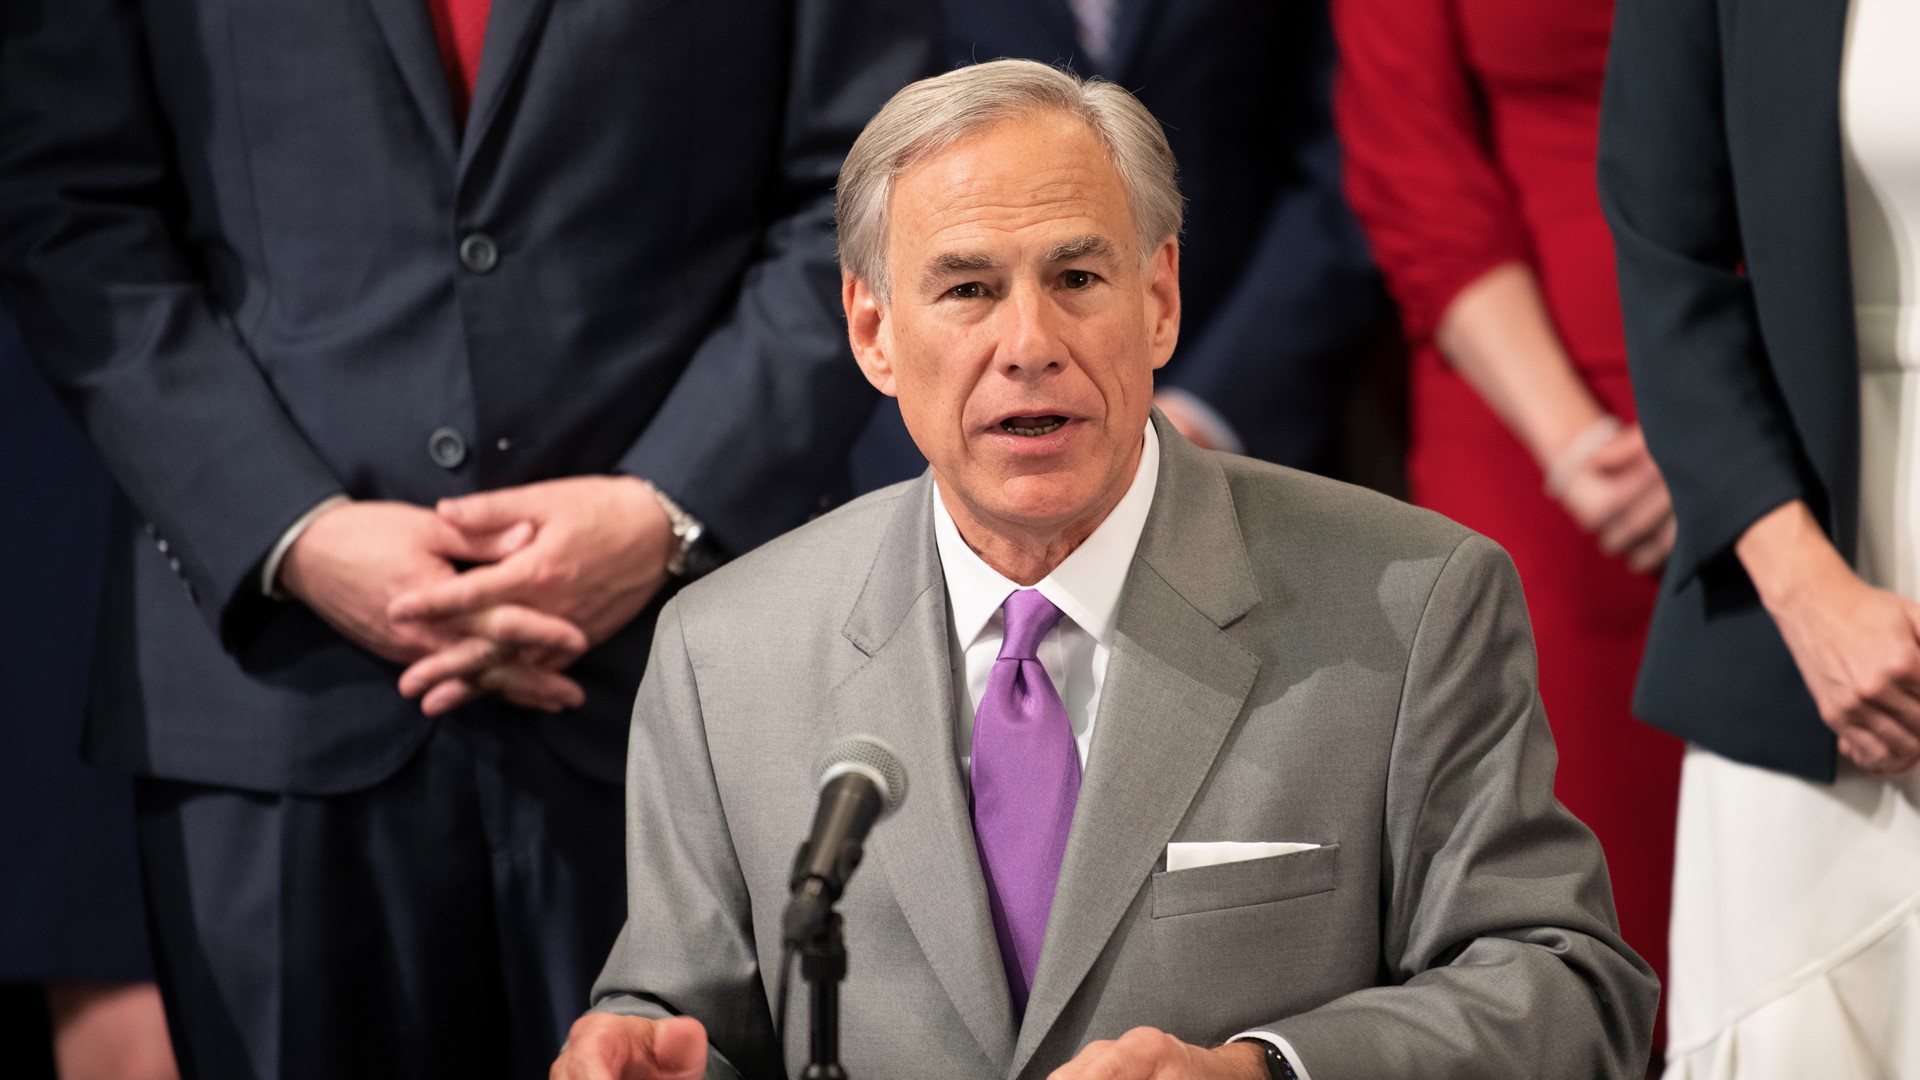 As one Texas special session ends, another begins. Gov. Greg Abbott is asking lawmakers to again focus on property tax relief.